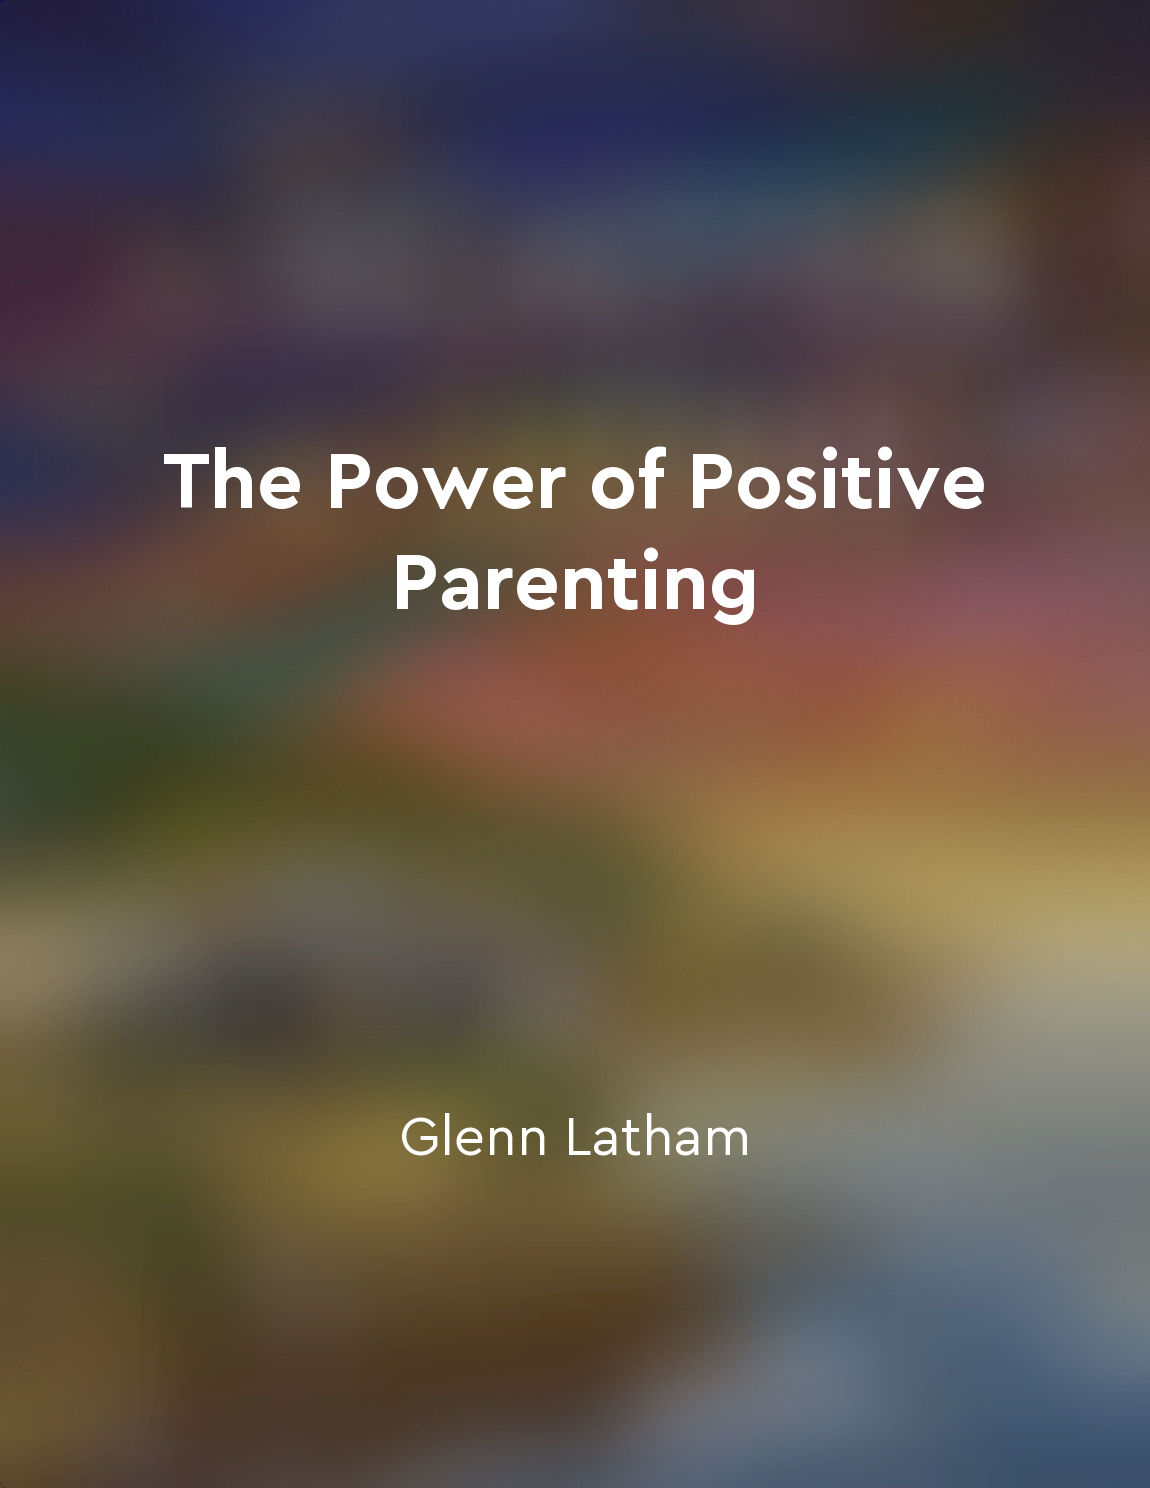 The Power of Positive Parenting